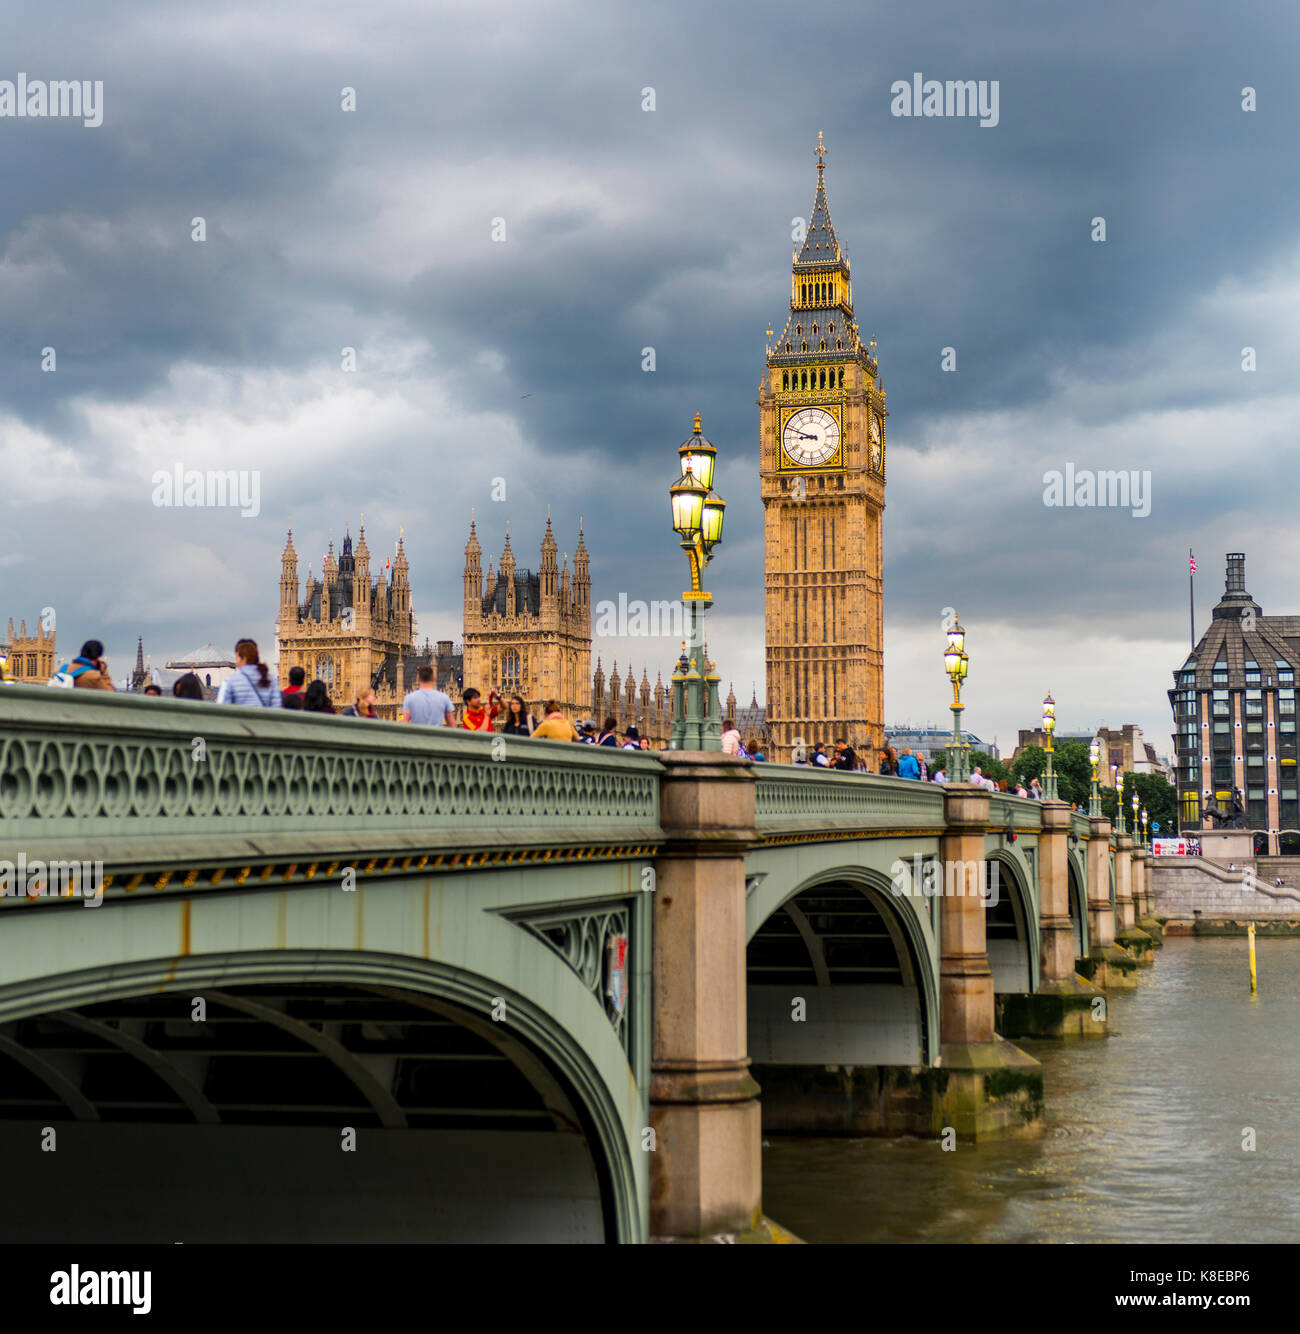 View over the river Thames, Westminster Bridge, London, England, Great Britain, Houses of Parliament, Big Ben Stock Photo